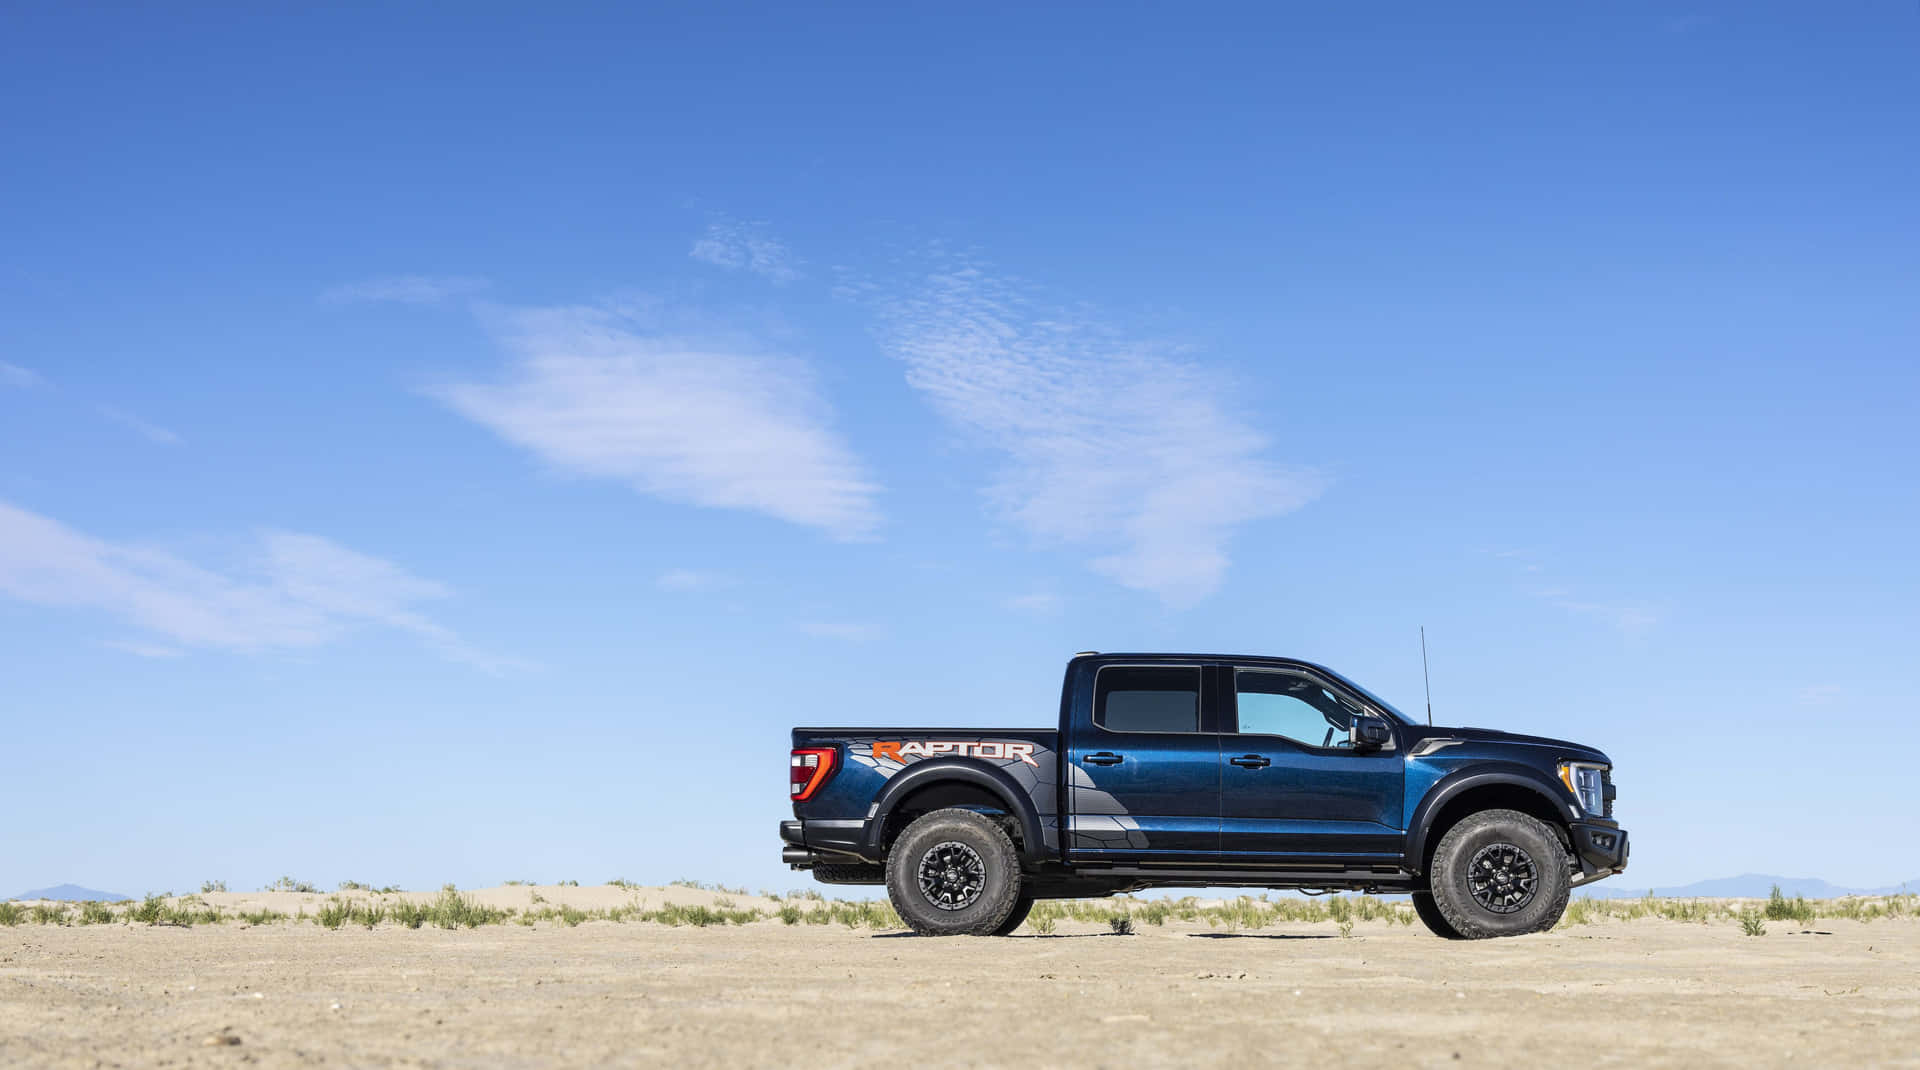 Image  The Stylish and Powerful Ford F-150 Wallpaper